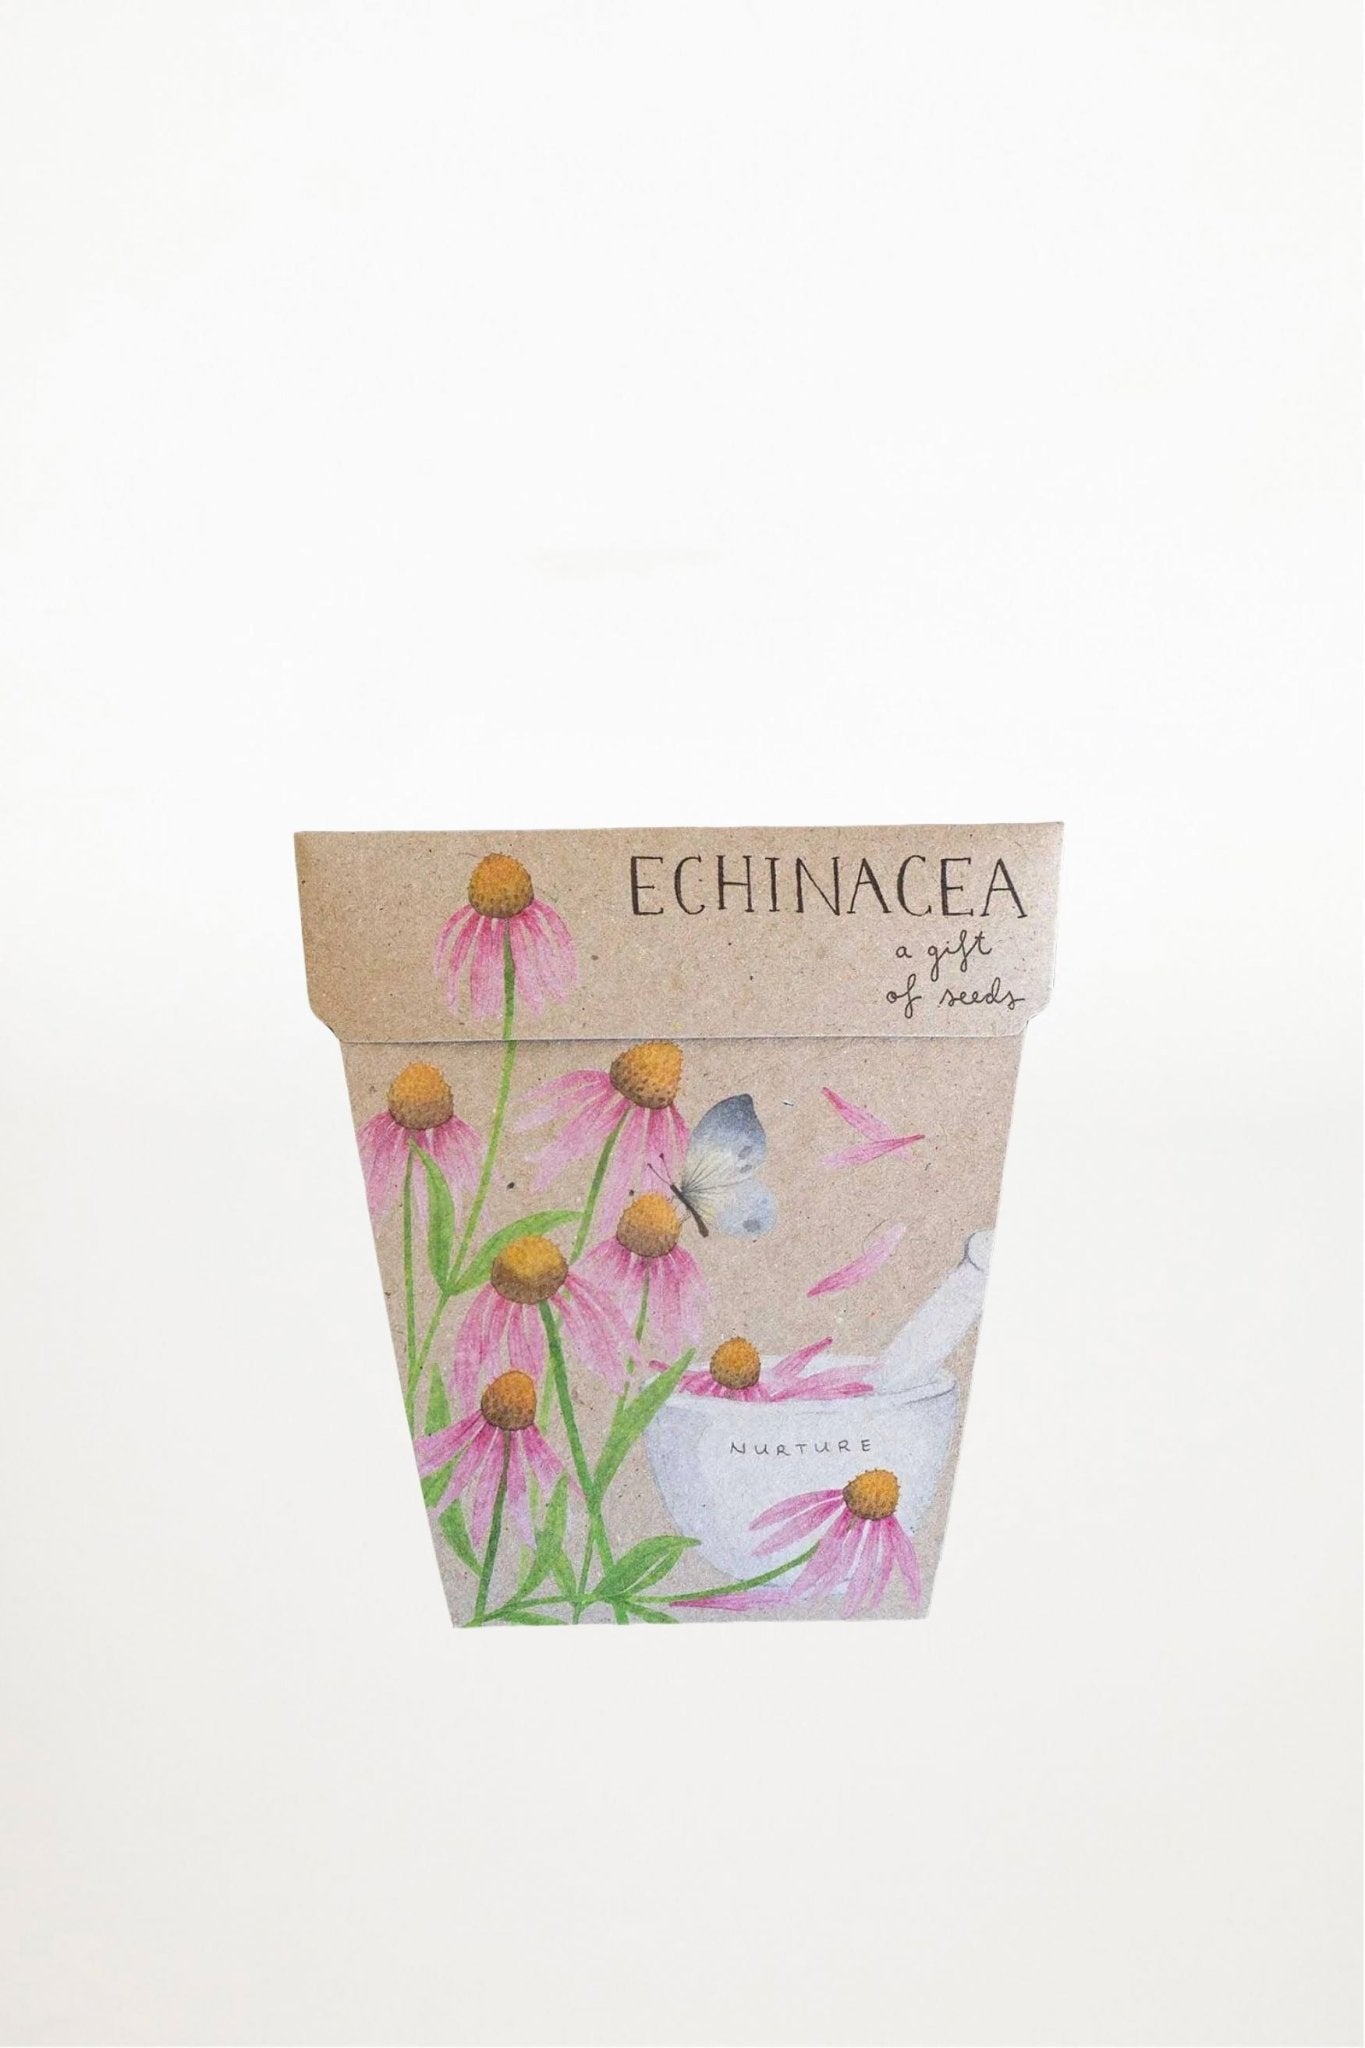 Sow 'n Sow - Echinacea Gift of Seed (Australia Only) - Ensemble Studios